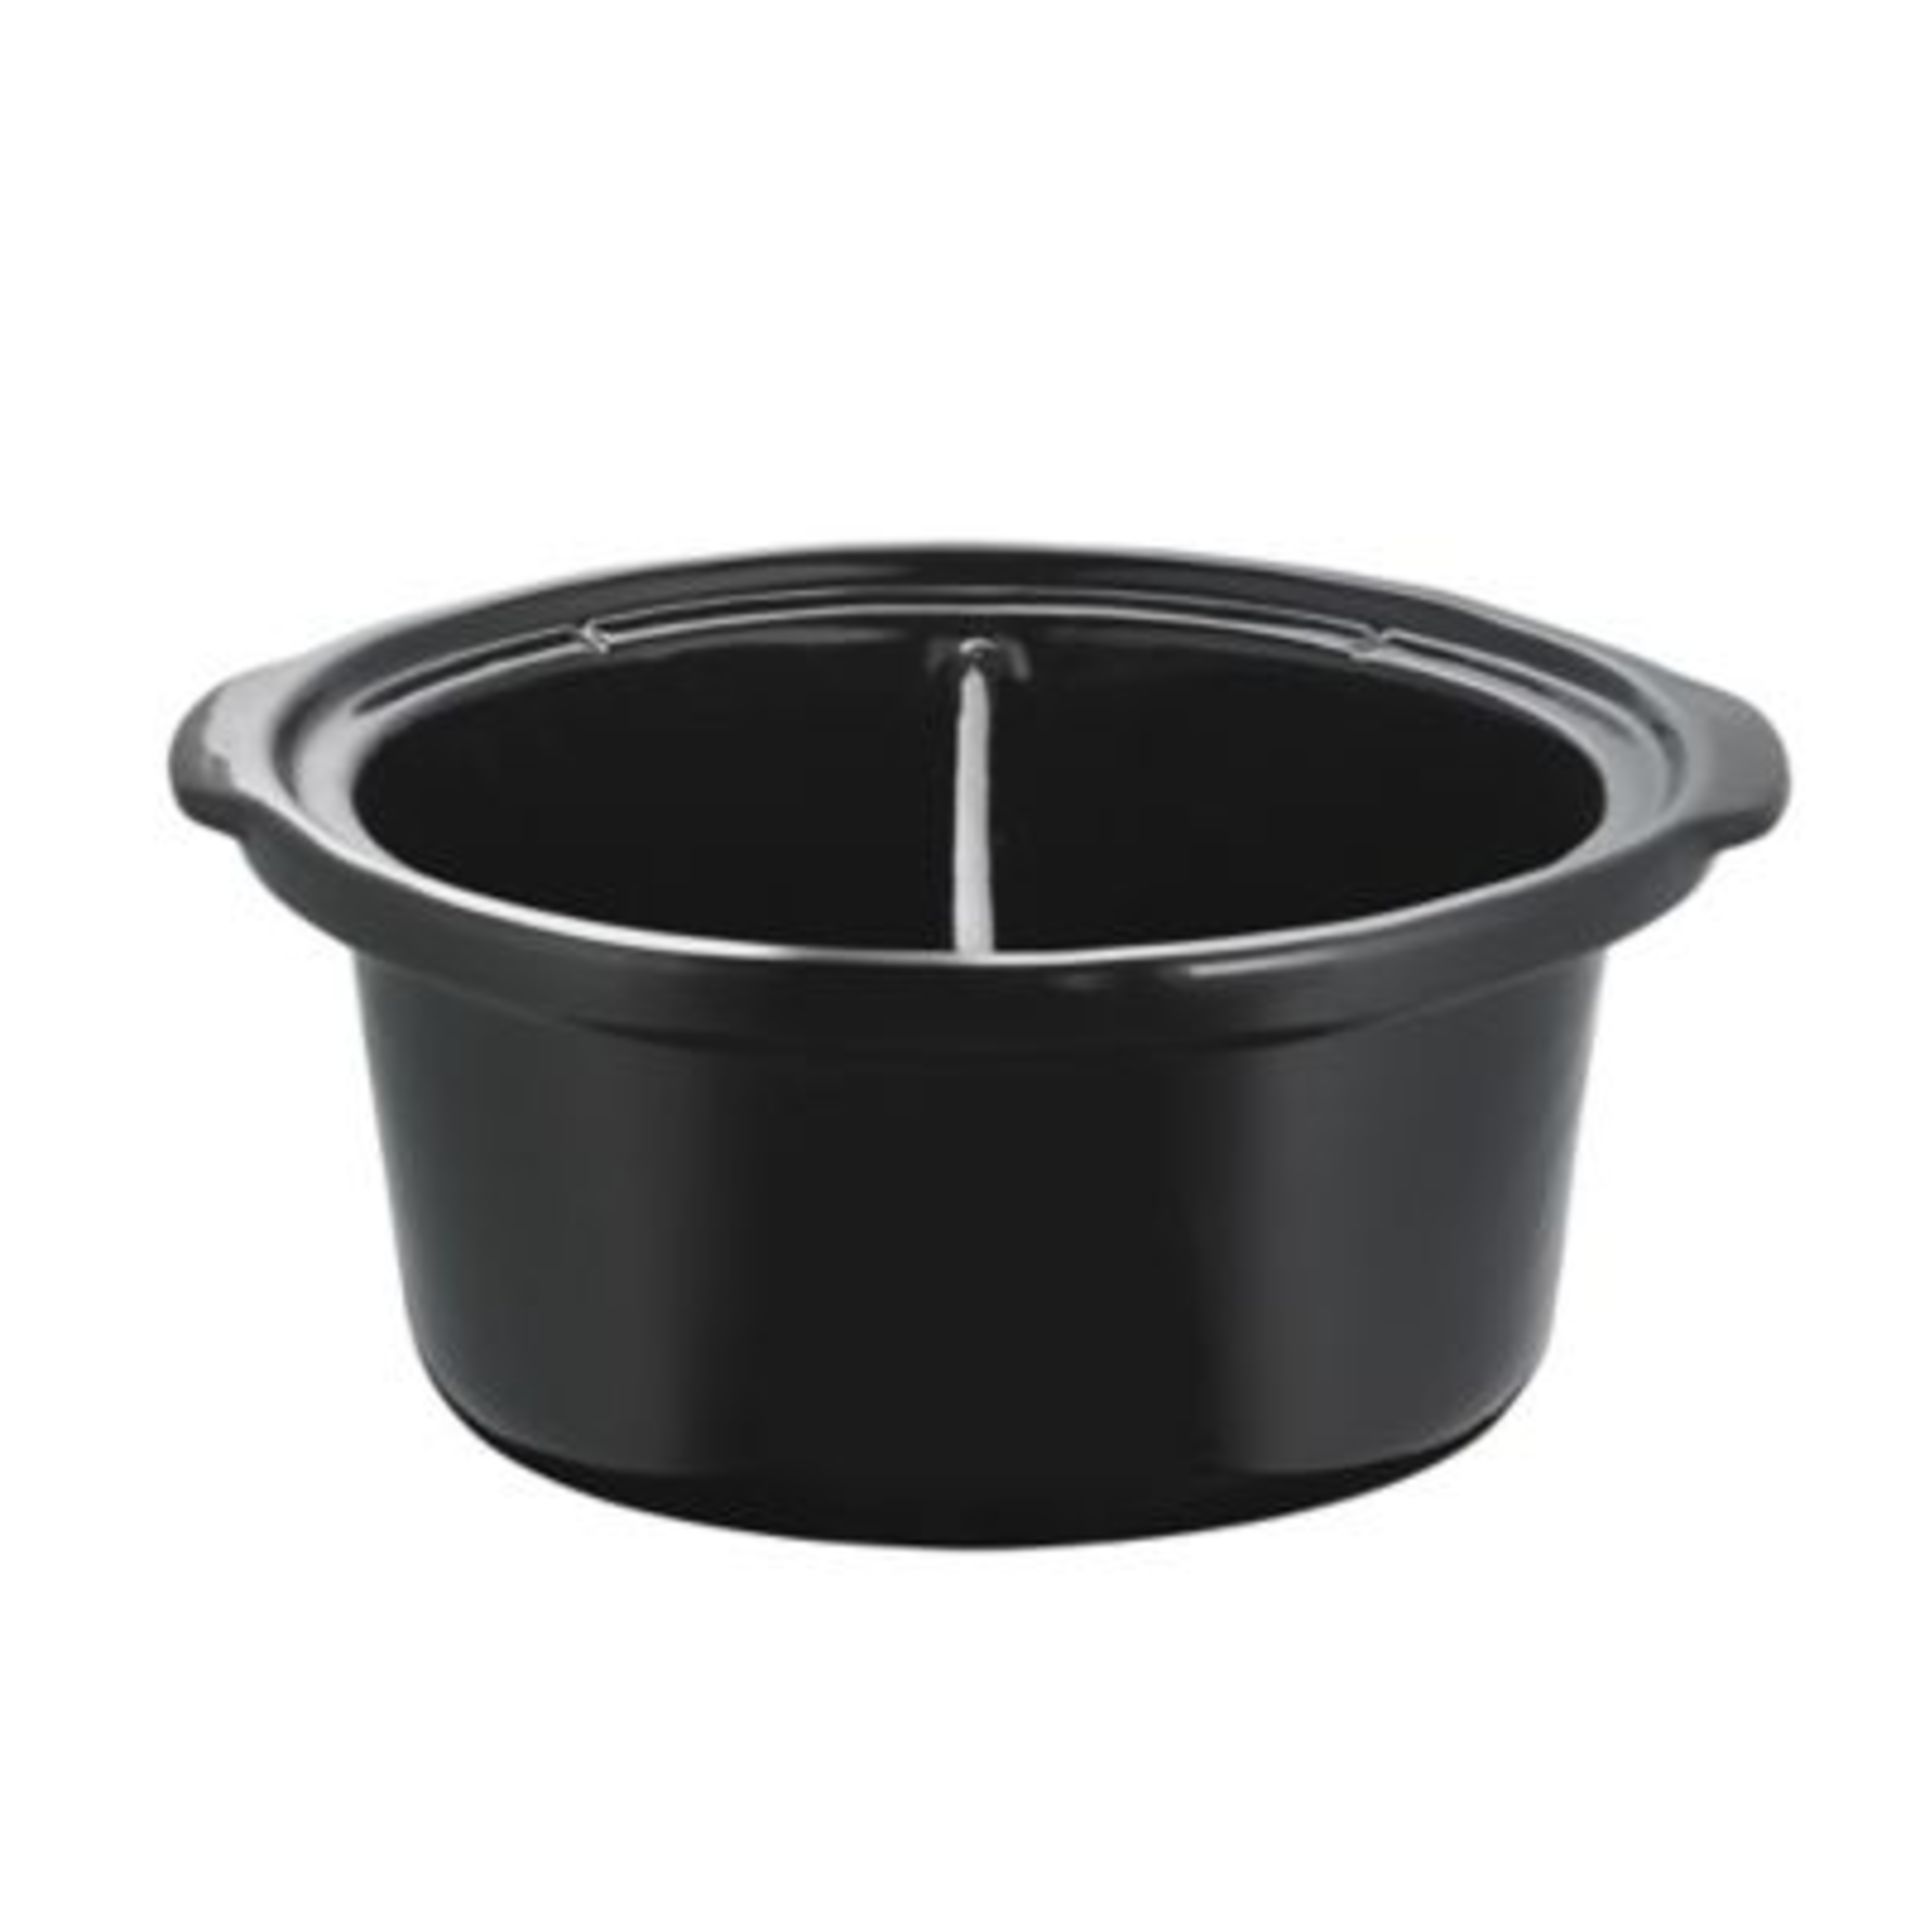 V Brand New Slow Cooker Pot With 2 Sections To Allow Cooking 2 Recipes At Once - Black Ceramic -